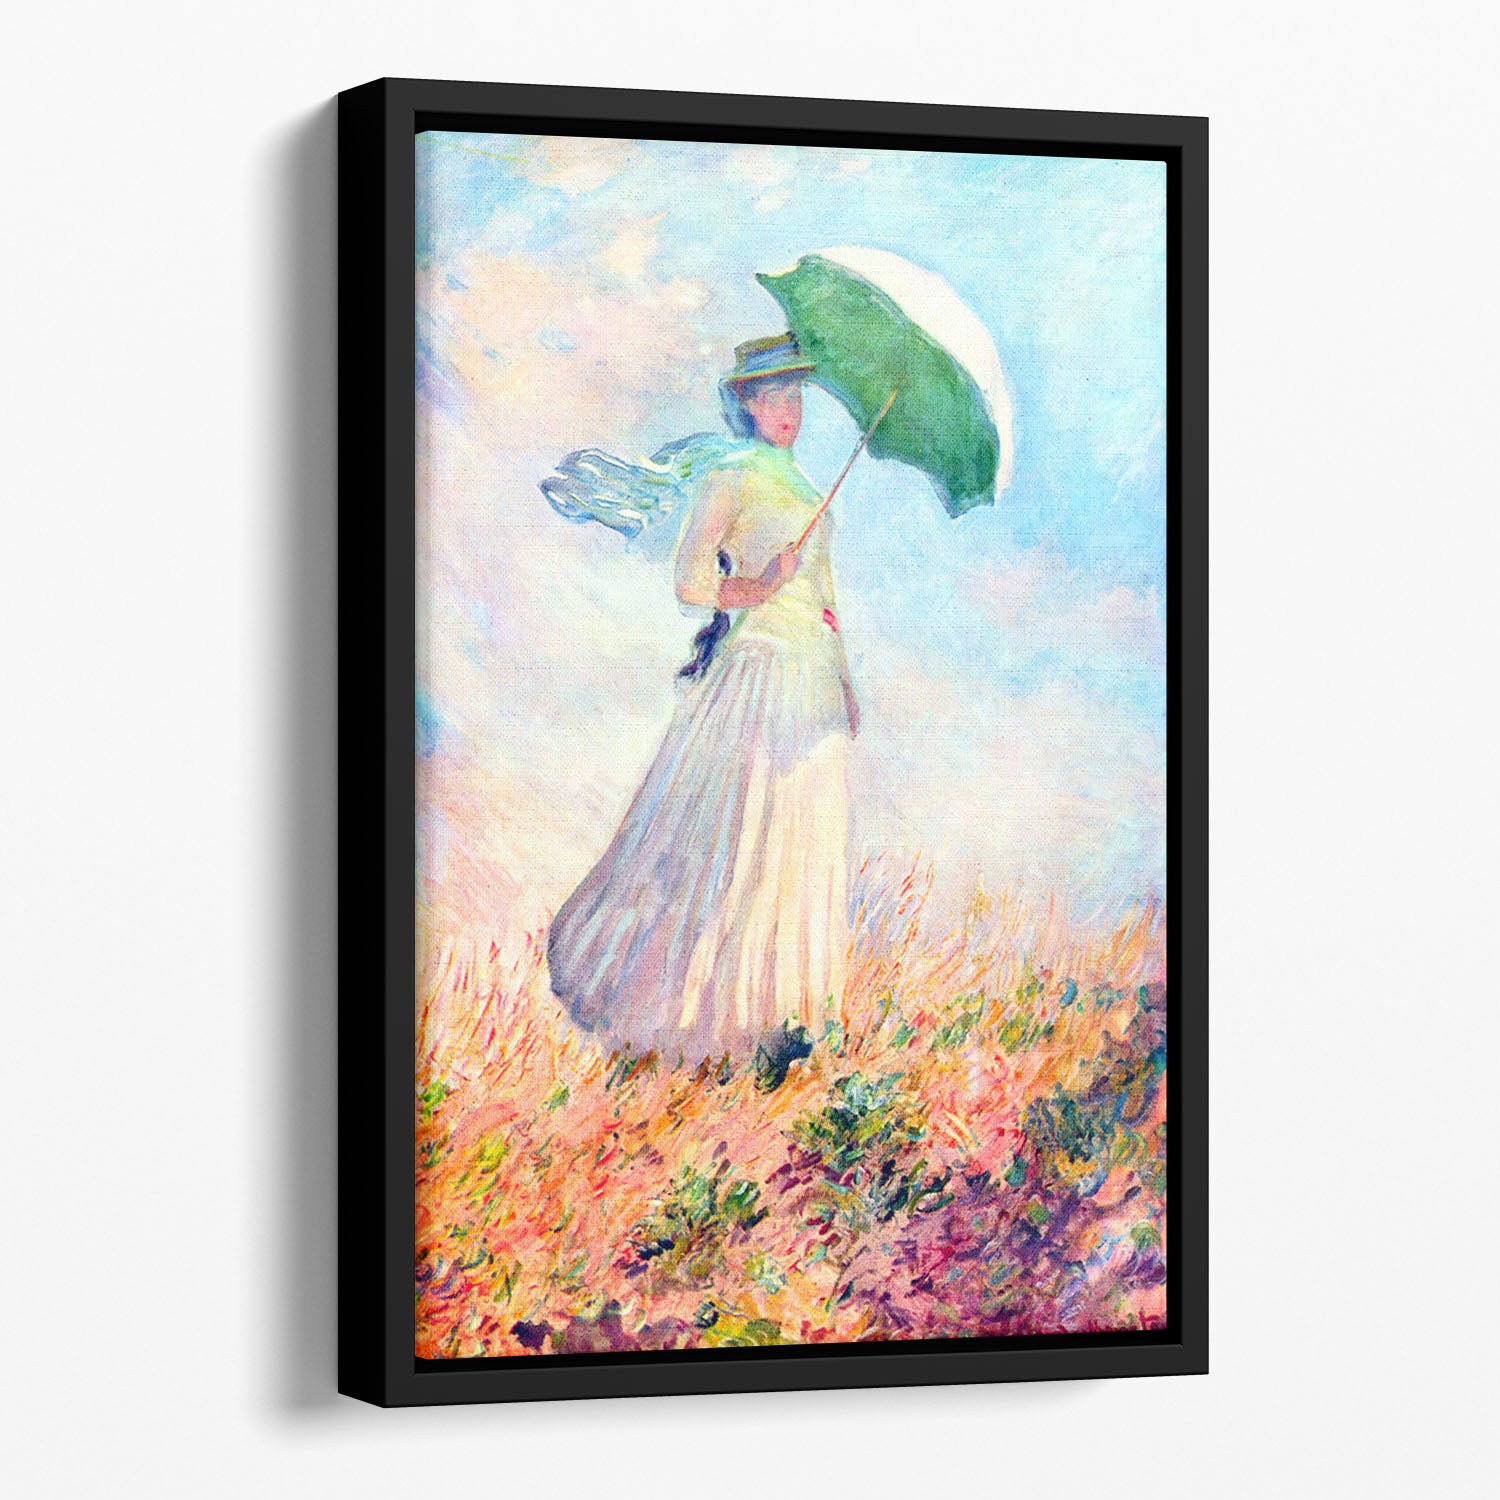 Lady with sunshade study by Monet Floating Framed Canvas